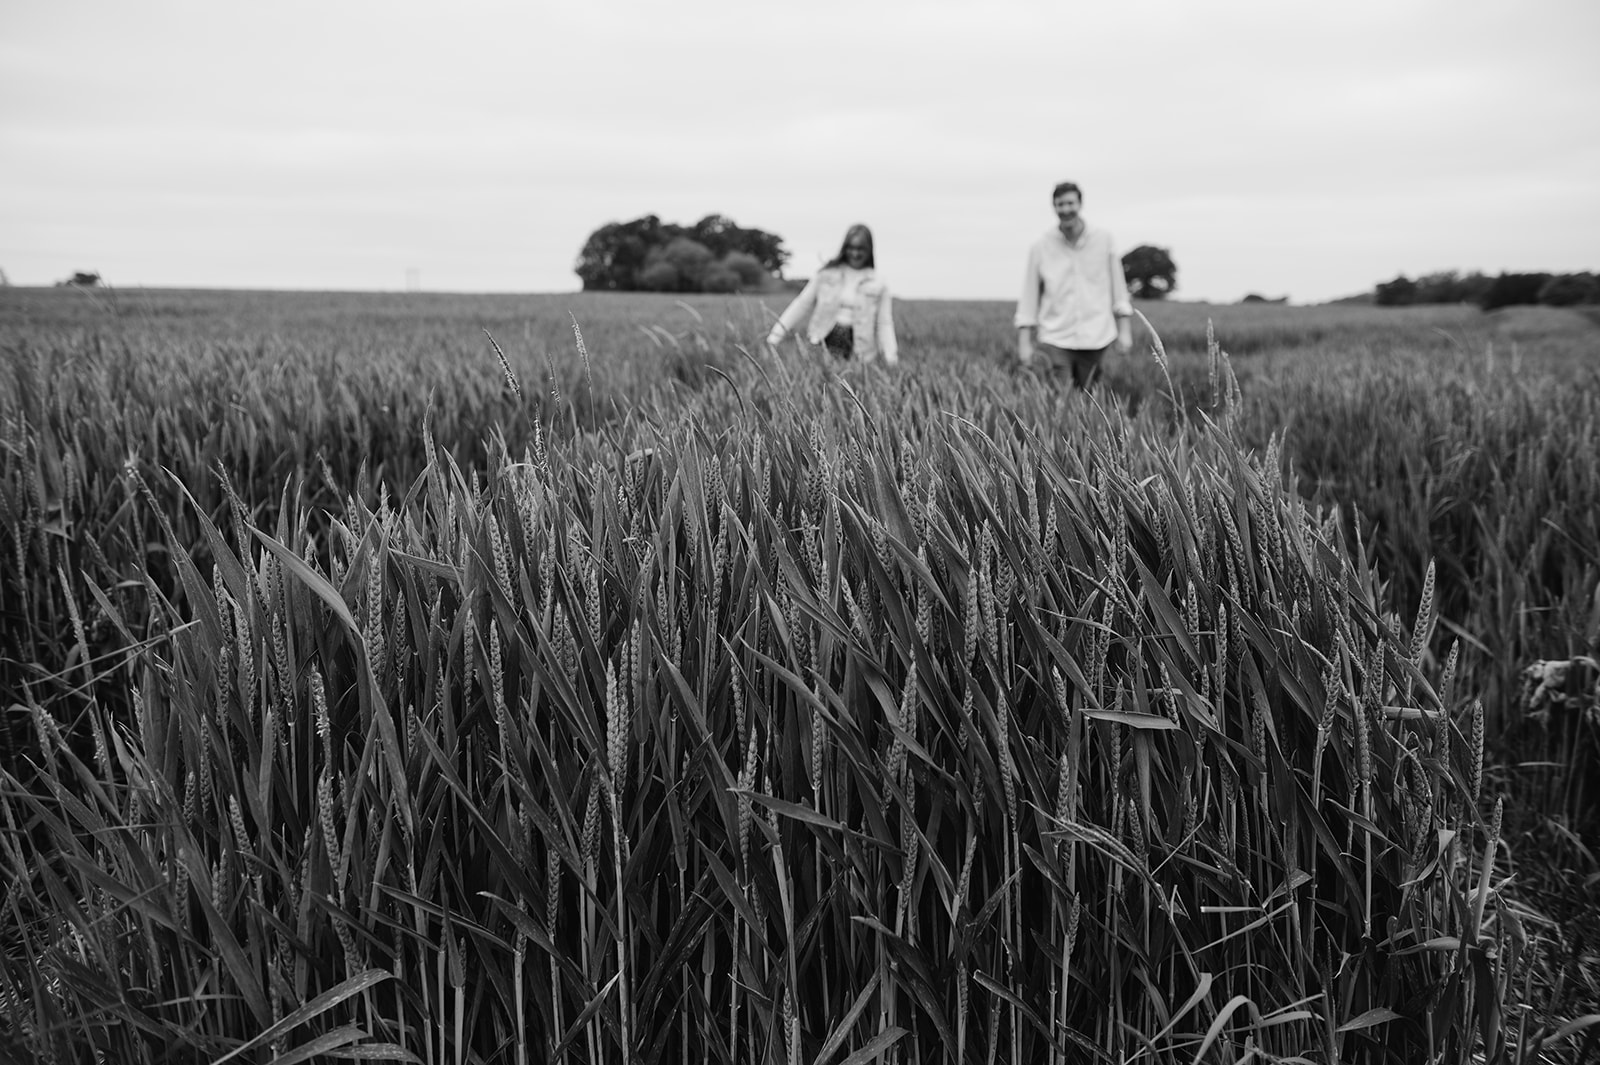 The couple are in the distance walking towards the camera with the wheat in focus in the foreground